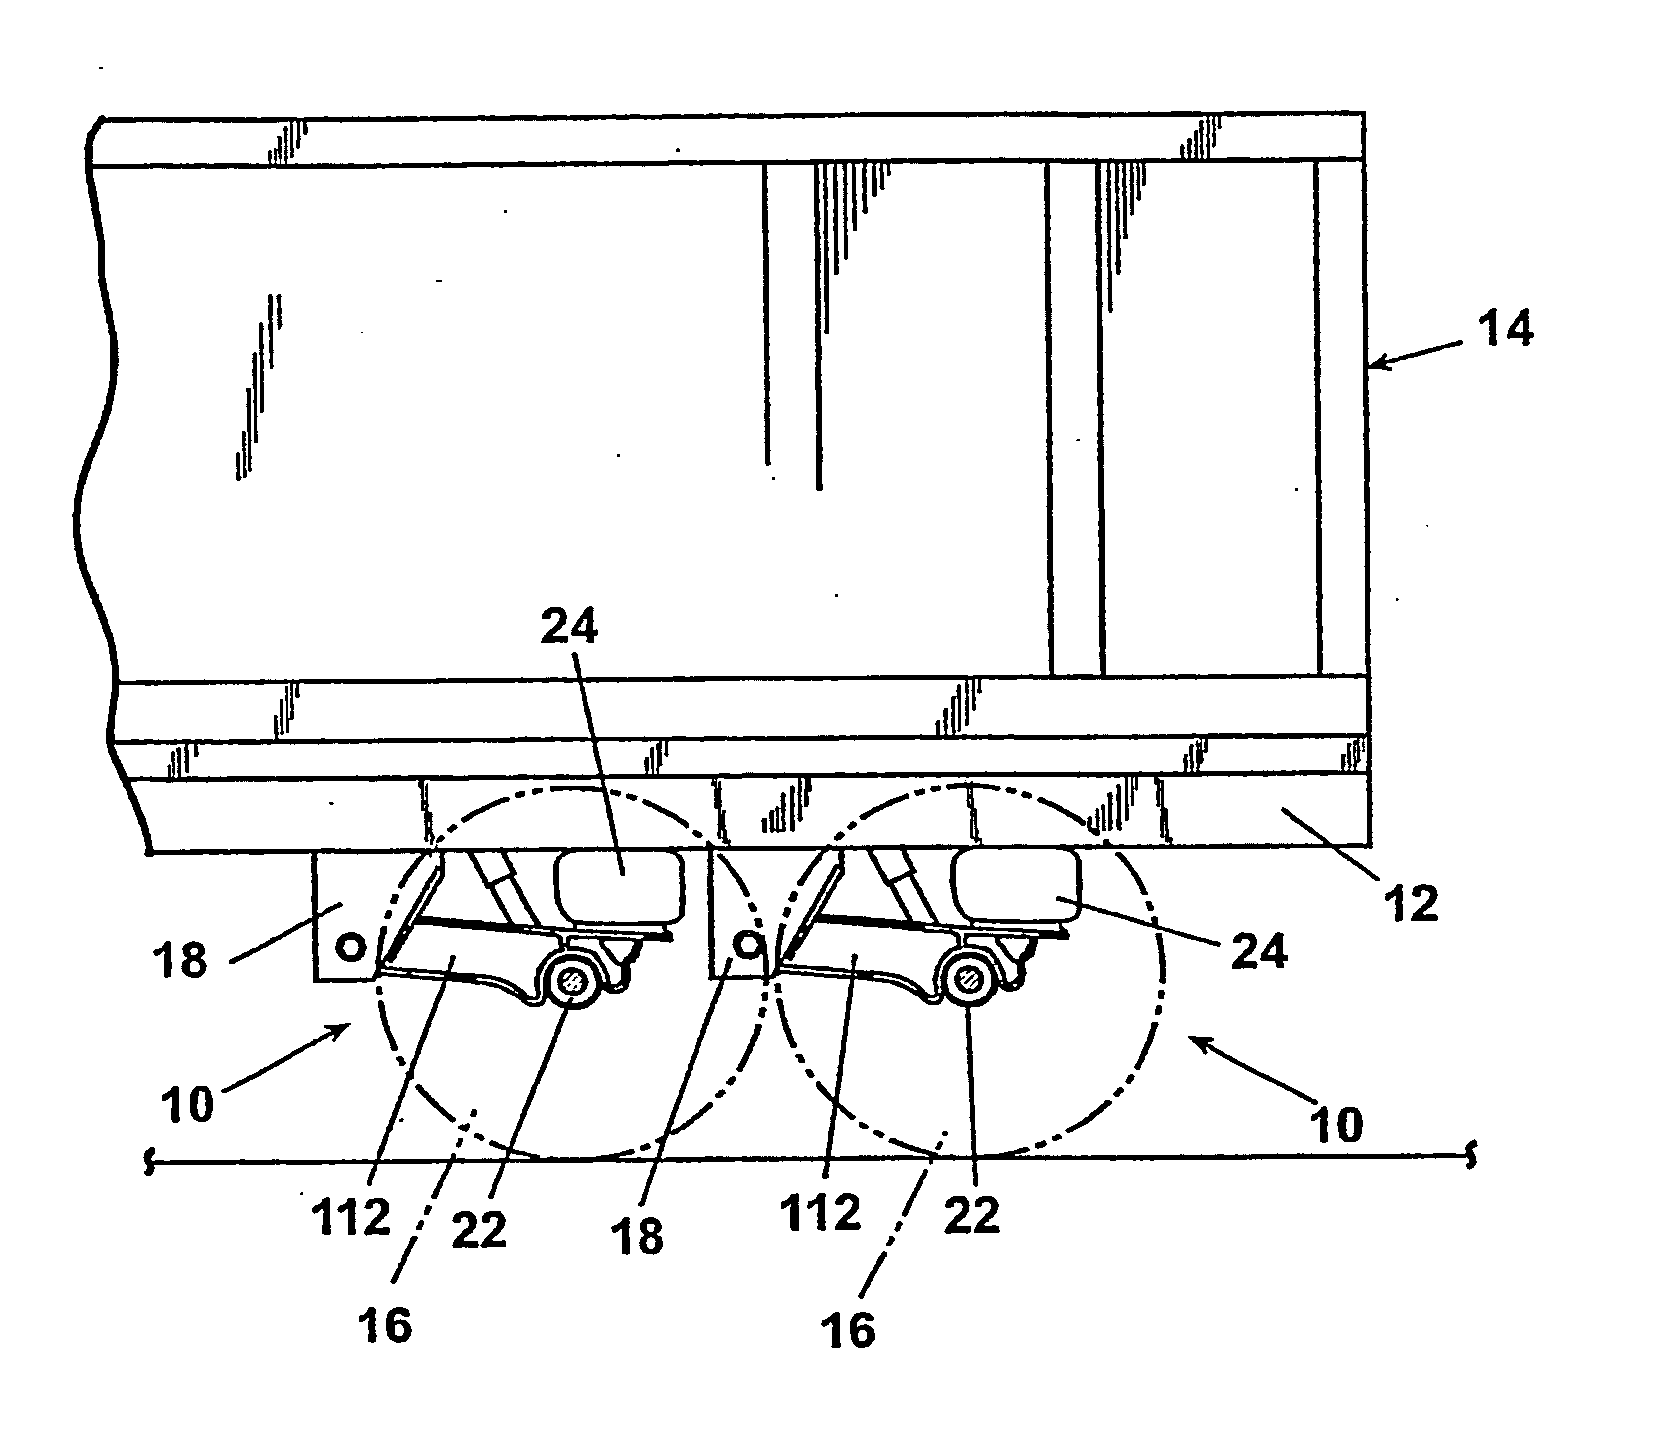 Trailing arm suspension with optimized i-beam